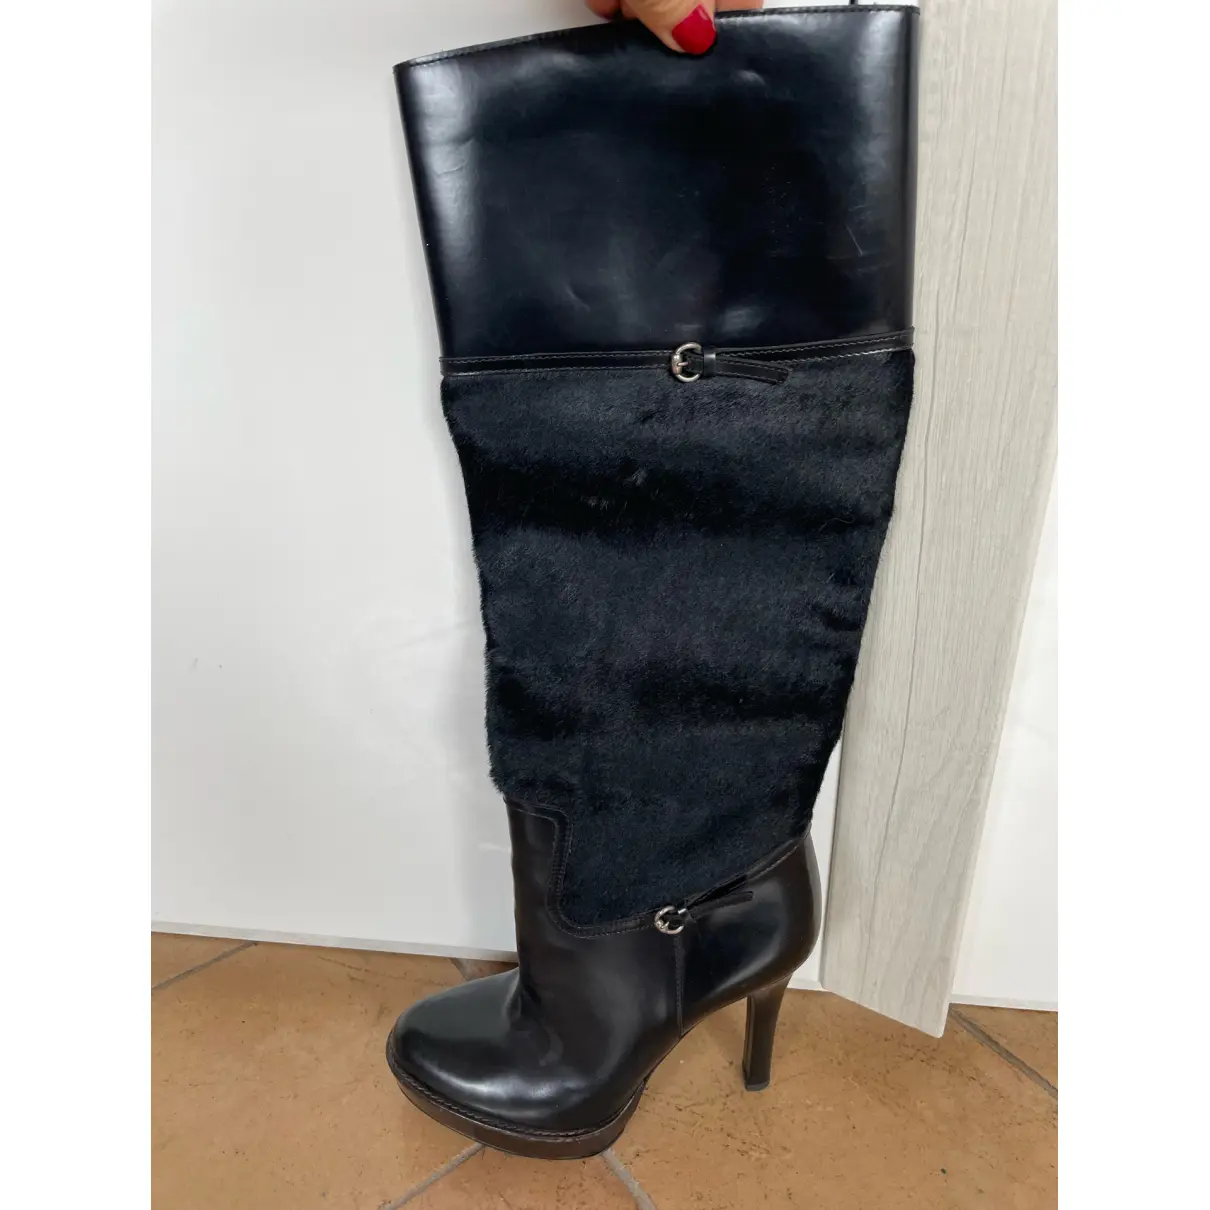 Pony-style calfskin riding boots Gucci